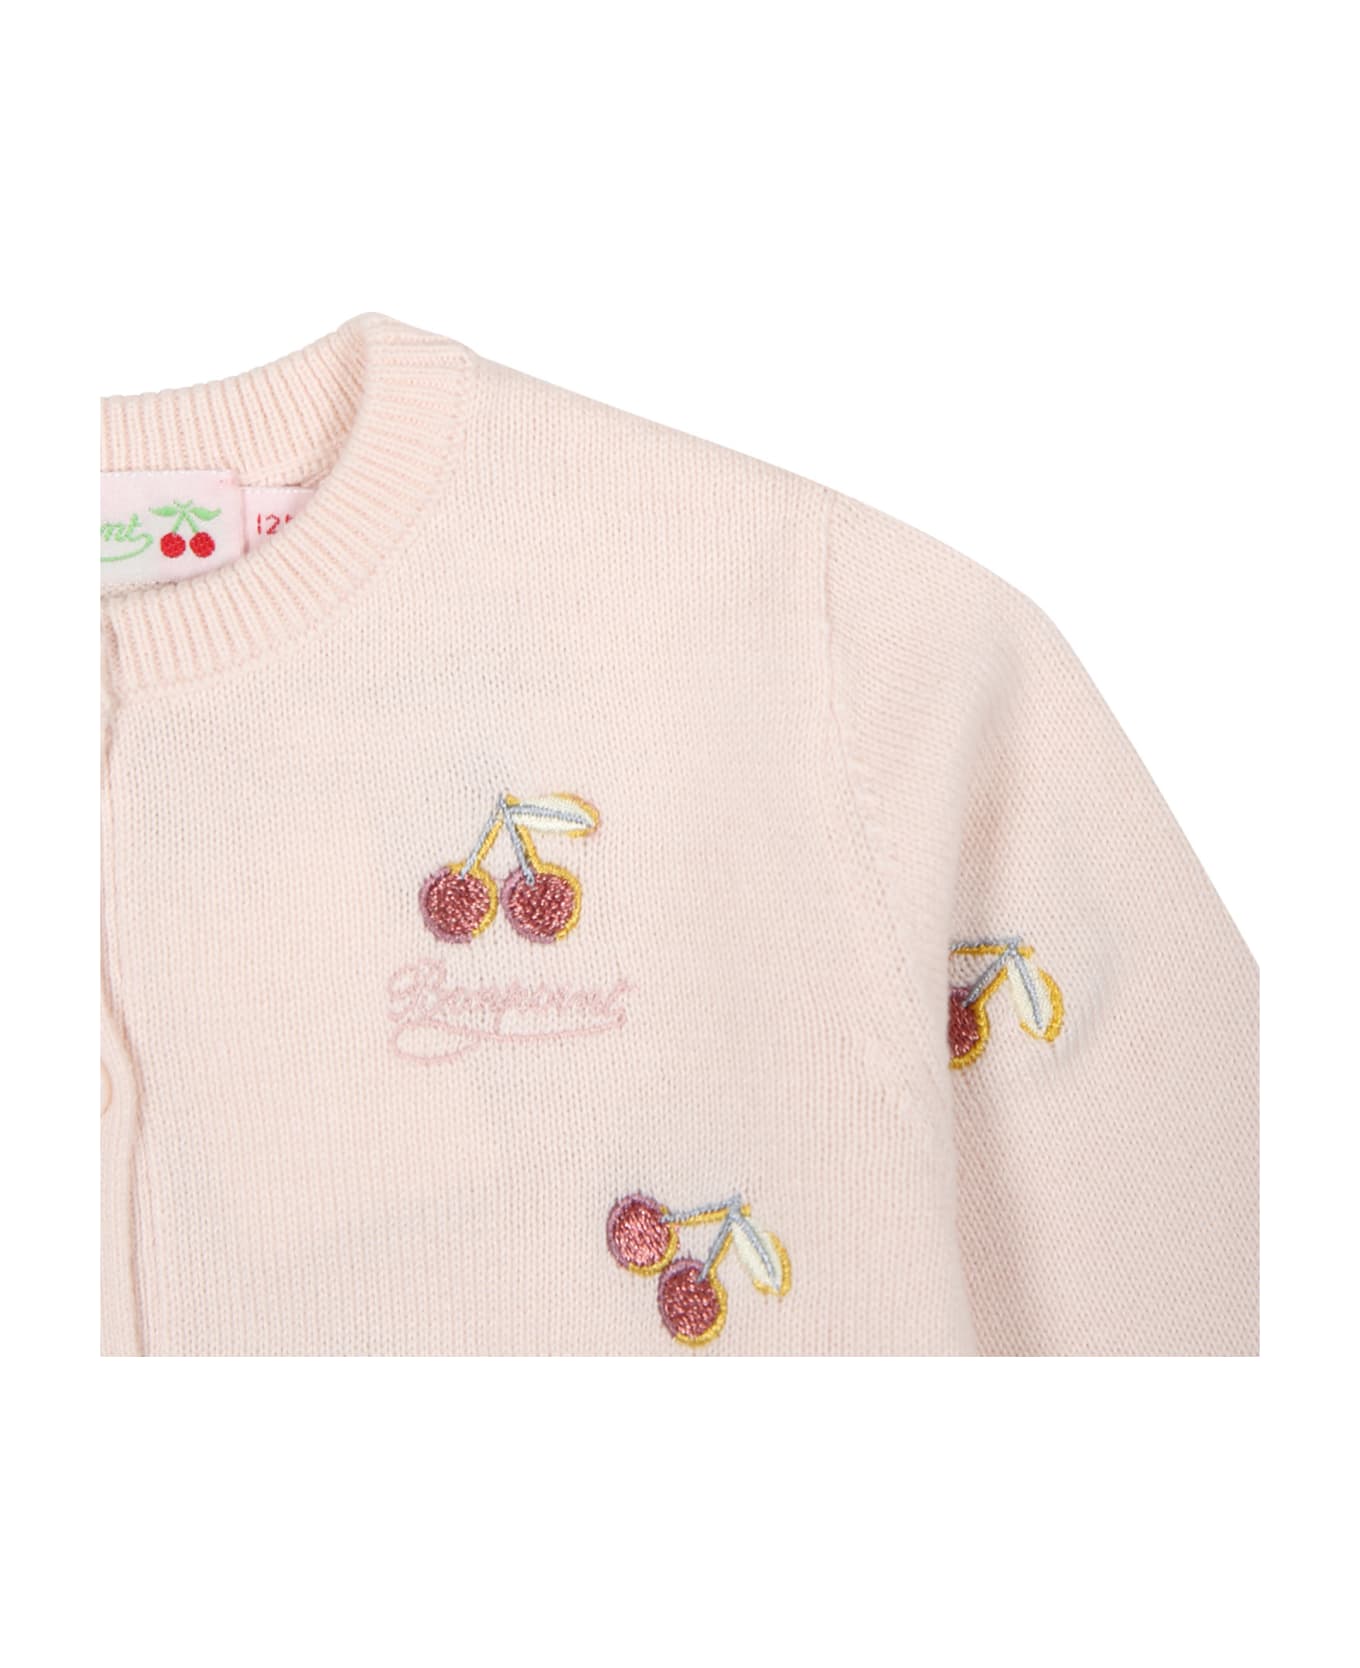 Bonpoint Pink Cardigan For Baby Girl With Cherries - Rosa